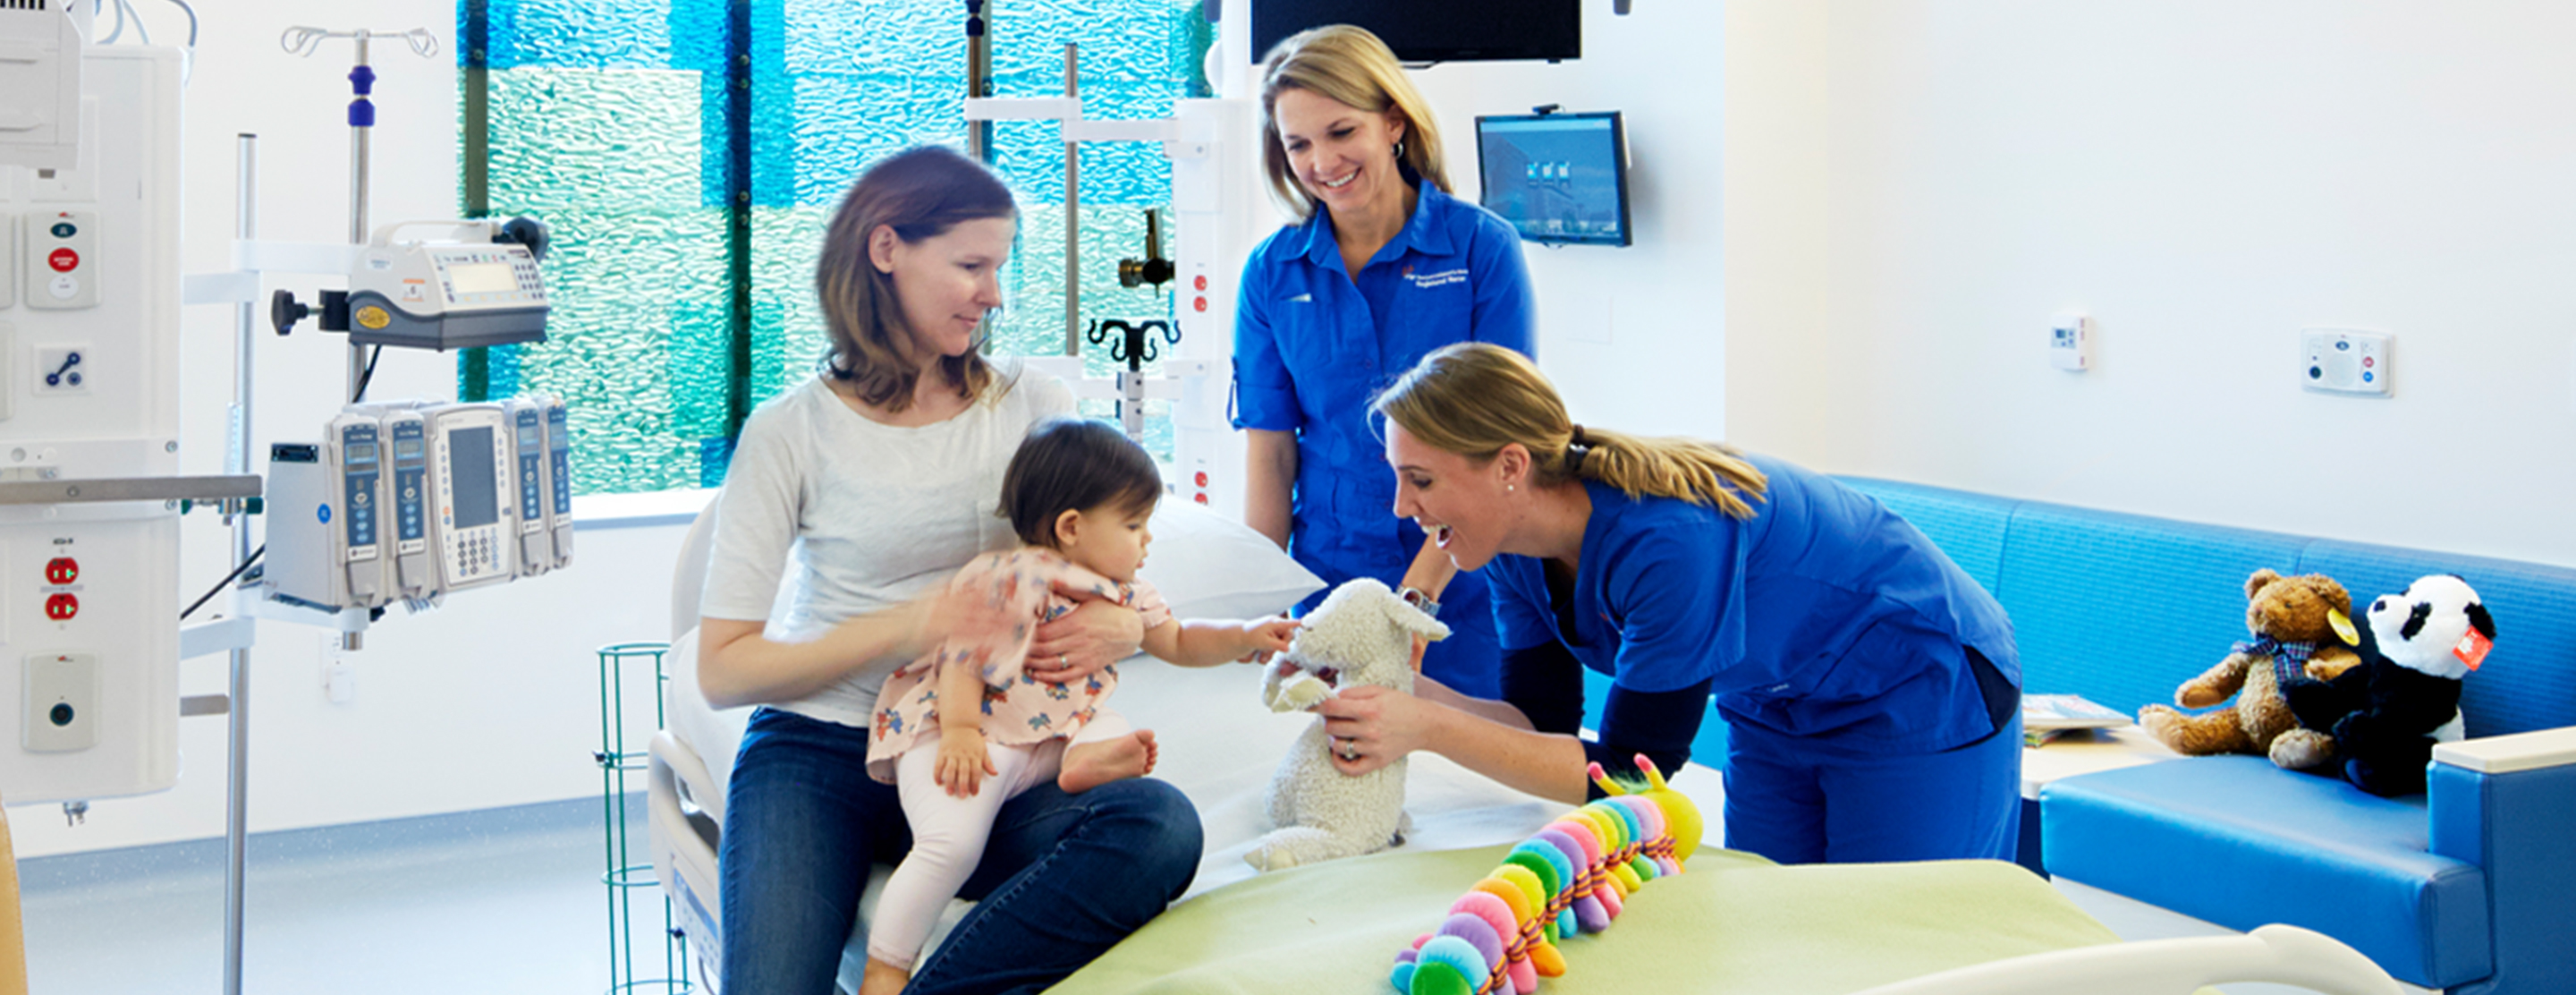 quality-of-patient-care-ucsf-benioff-childrens-hospital-san-francisco-2x